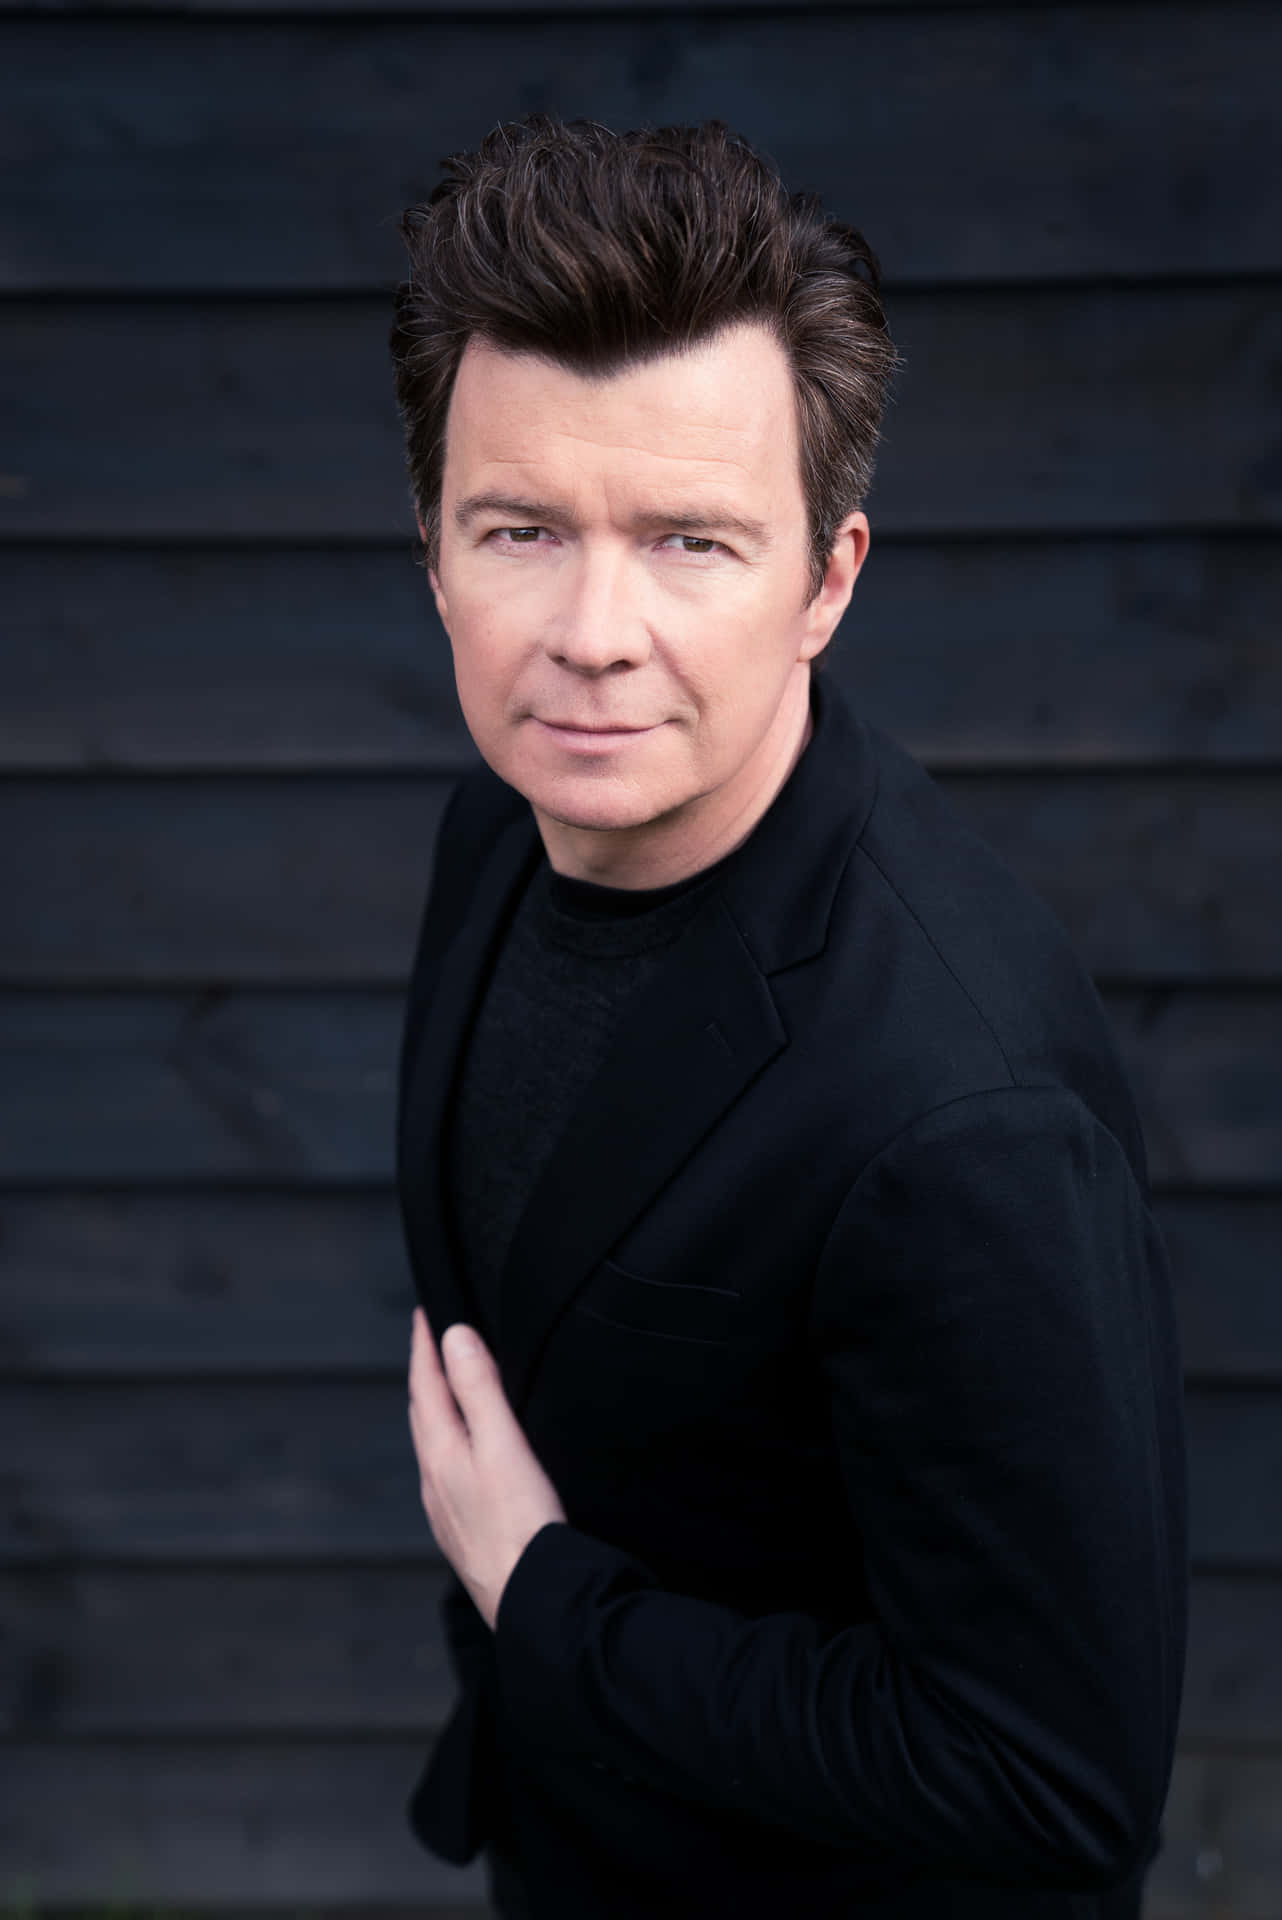 The Pop Star Rick Astley In His Signature Style. Background